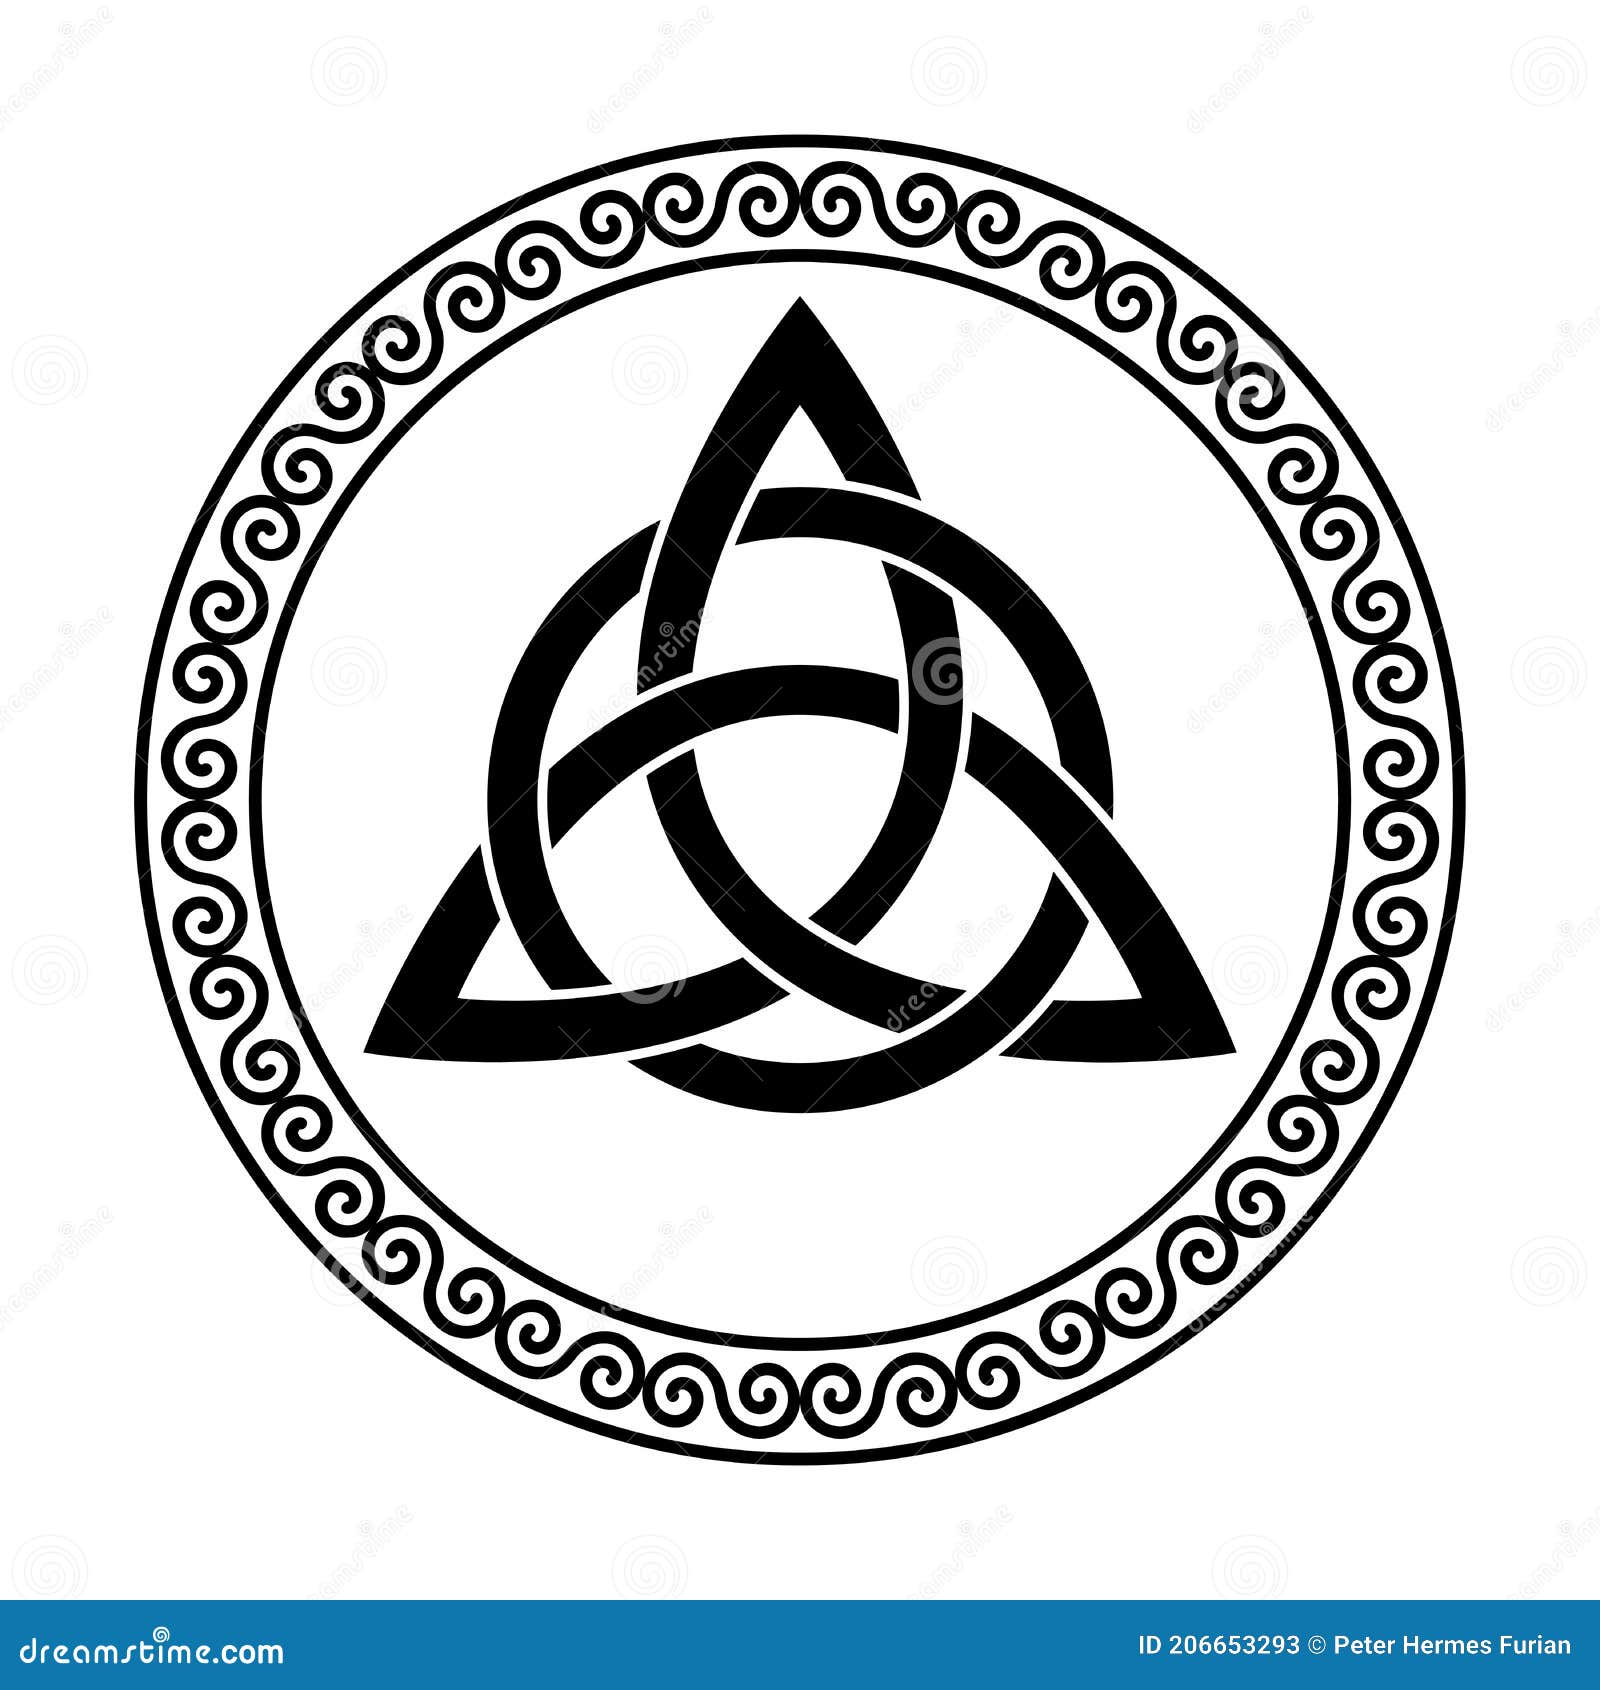 triquetra with circle, triangular celtic knot in circular spiral frame